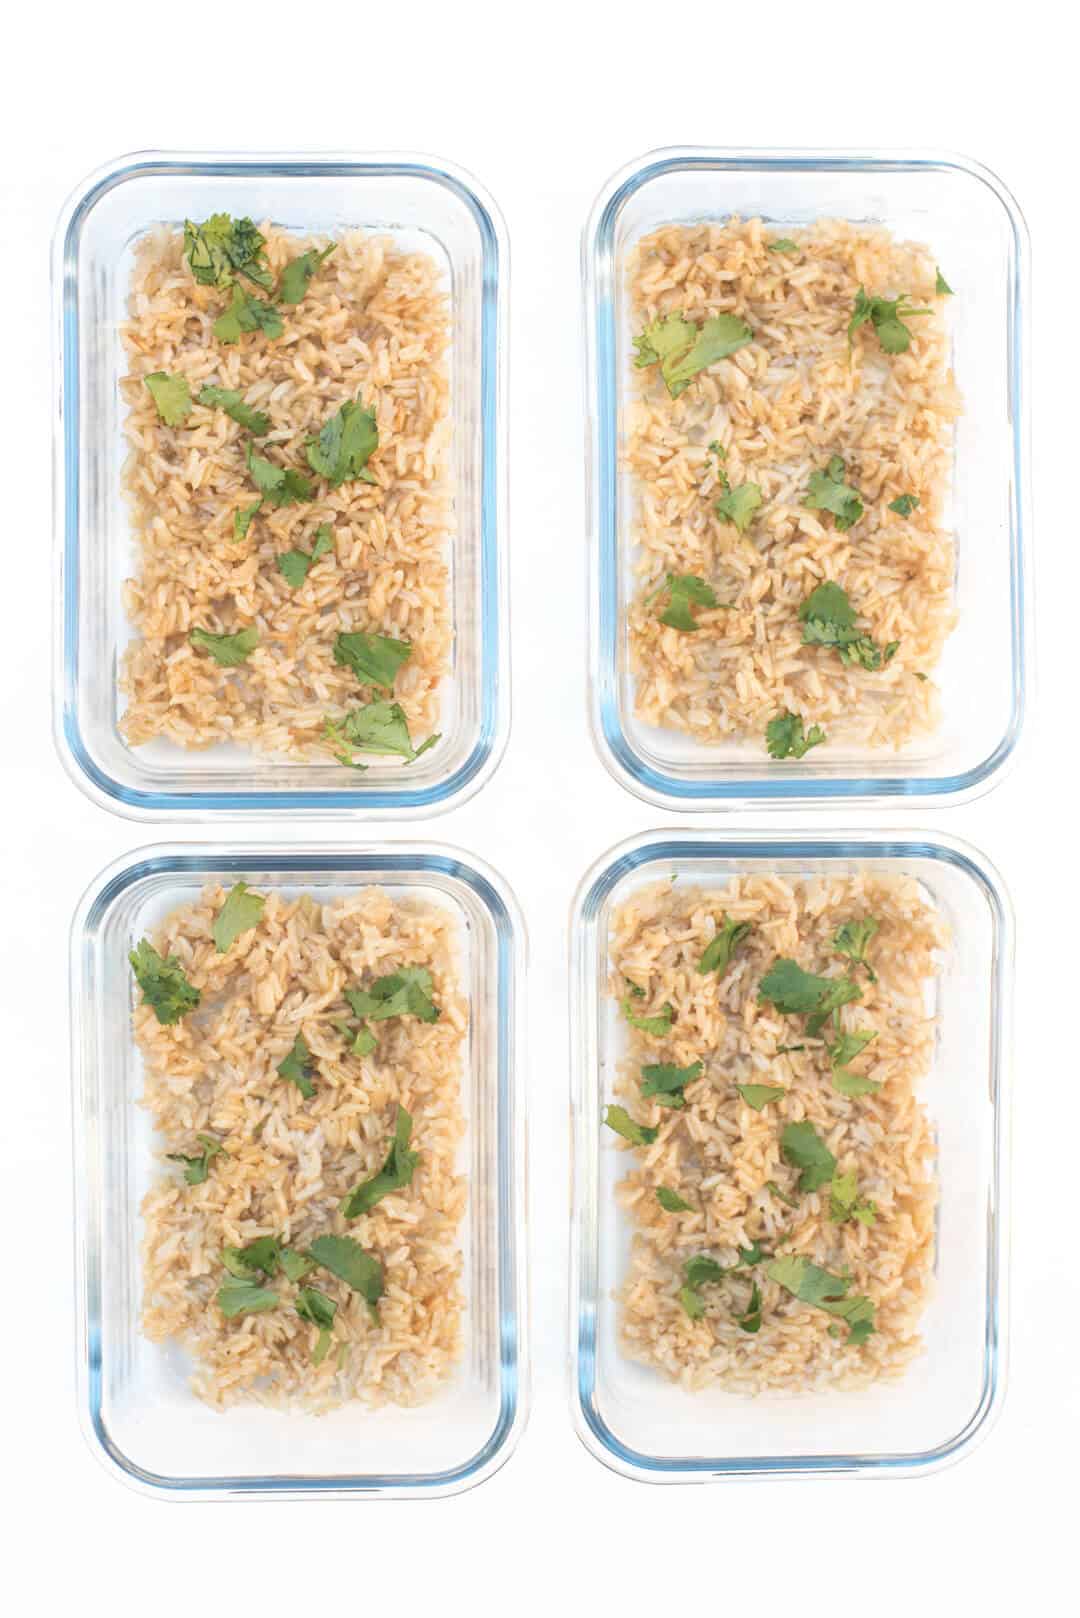 Brown rice and cilantro in four meal prep containers.